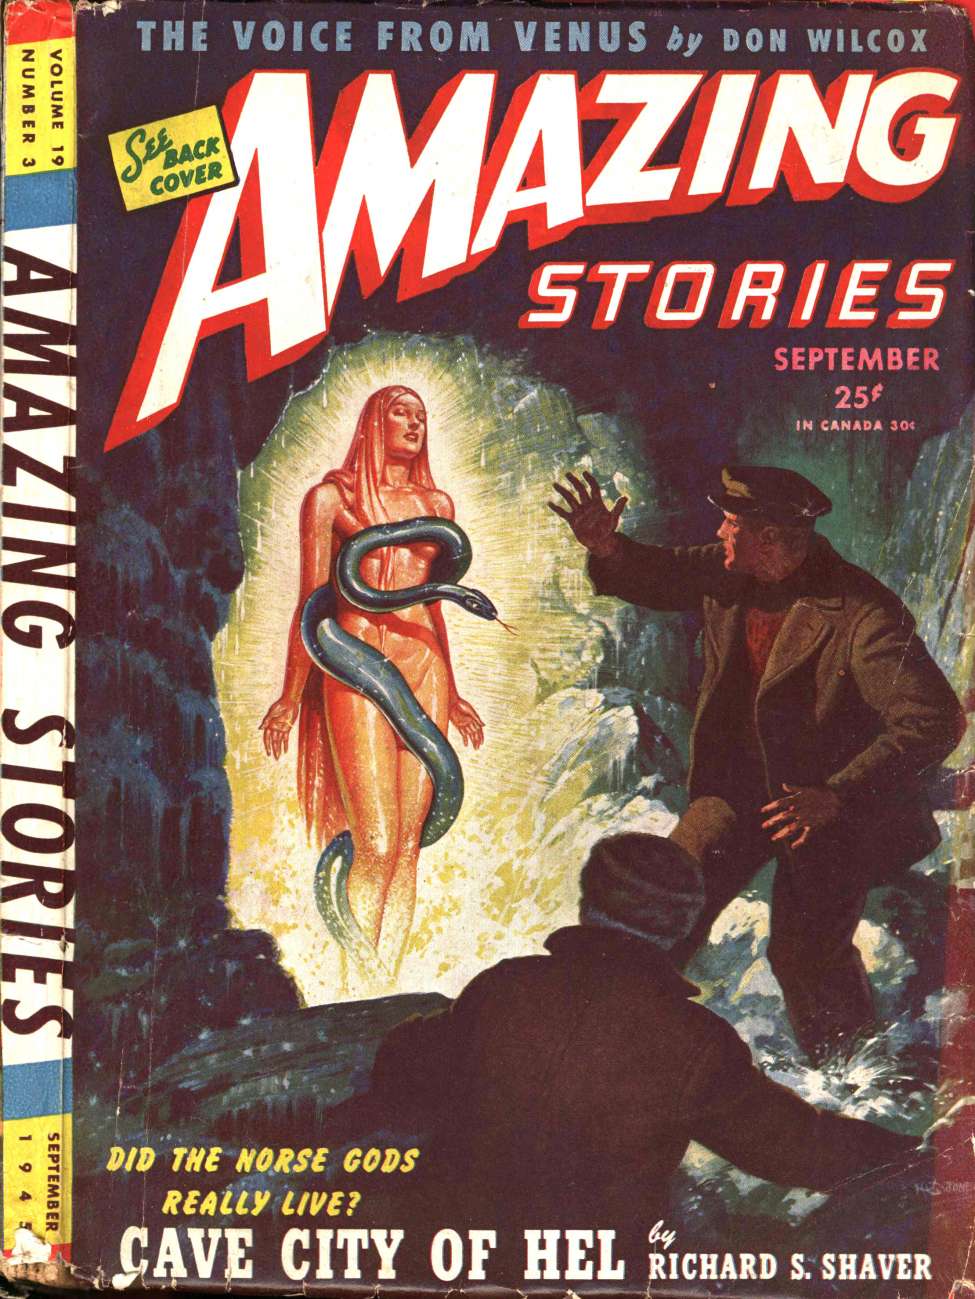 Comic Book Cover For Amazing Stories v19 3 - Cave City of Hel - Richard S. Shaver